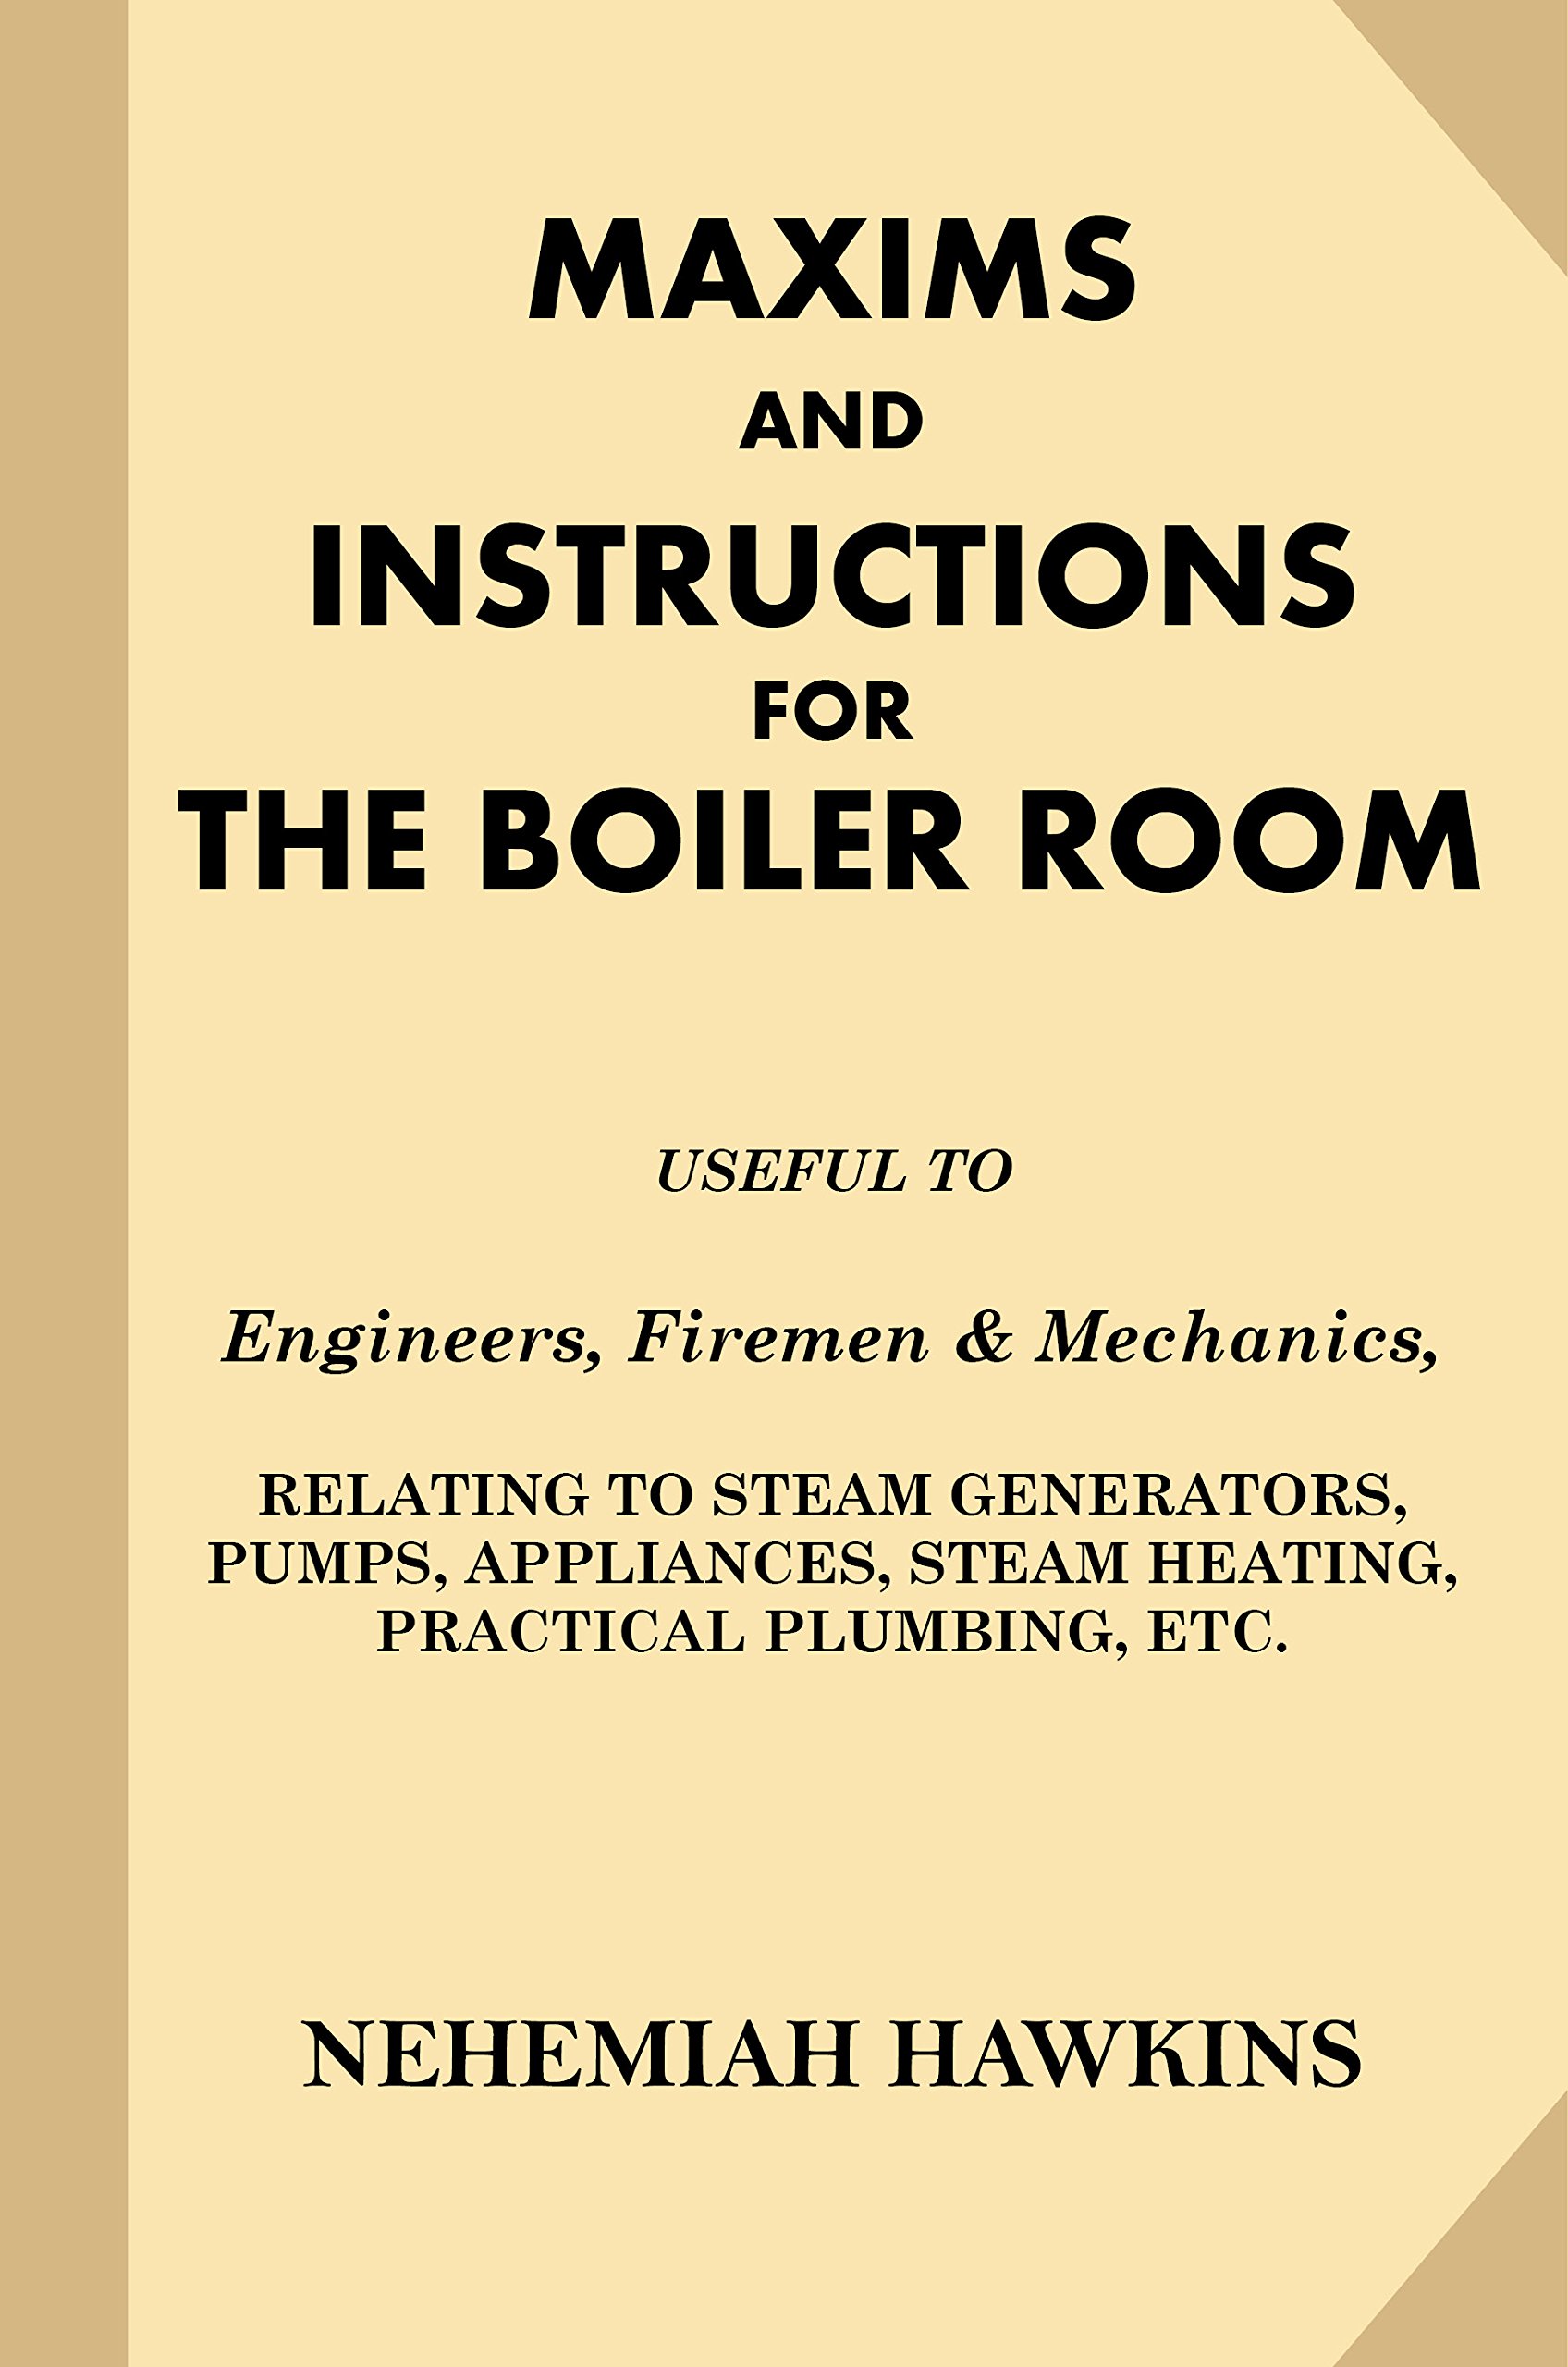 Maxims and Instructions for the Boiler Room: Useful to Engineers, Firemen & Mechanics, Relating to Steam Generators, Pumps, Appliances, Steam Heating, Practical Plumbing, etc.